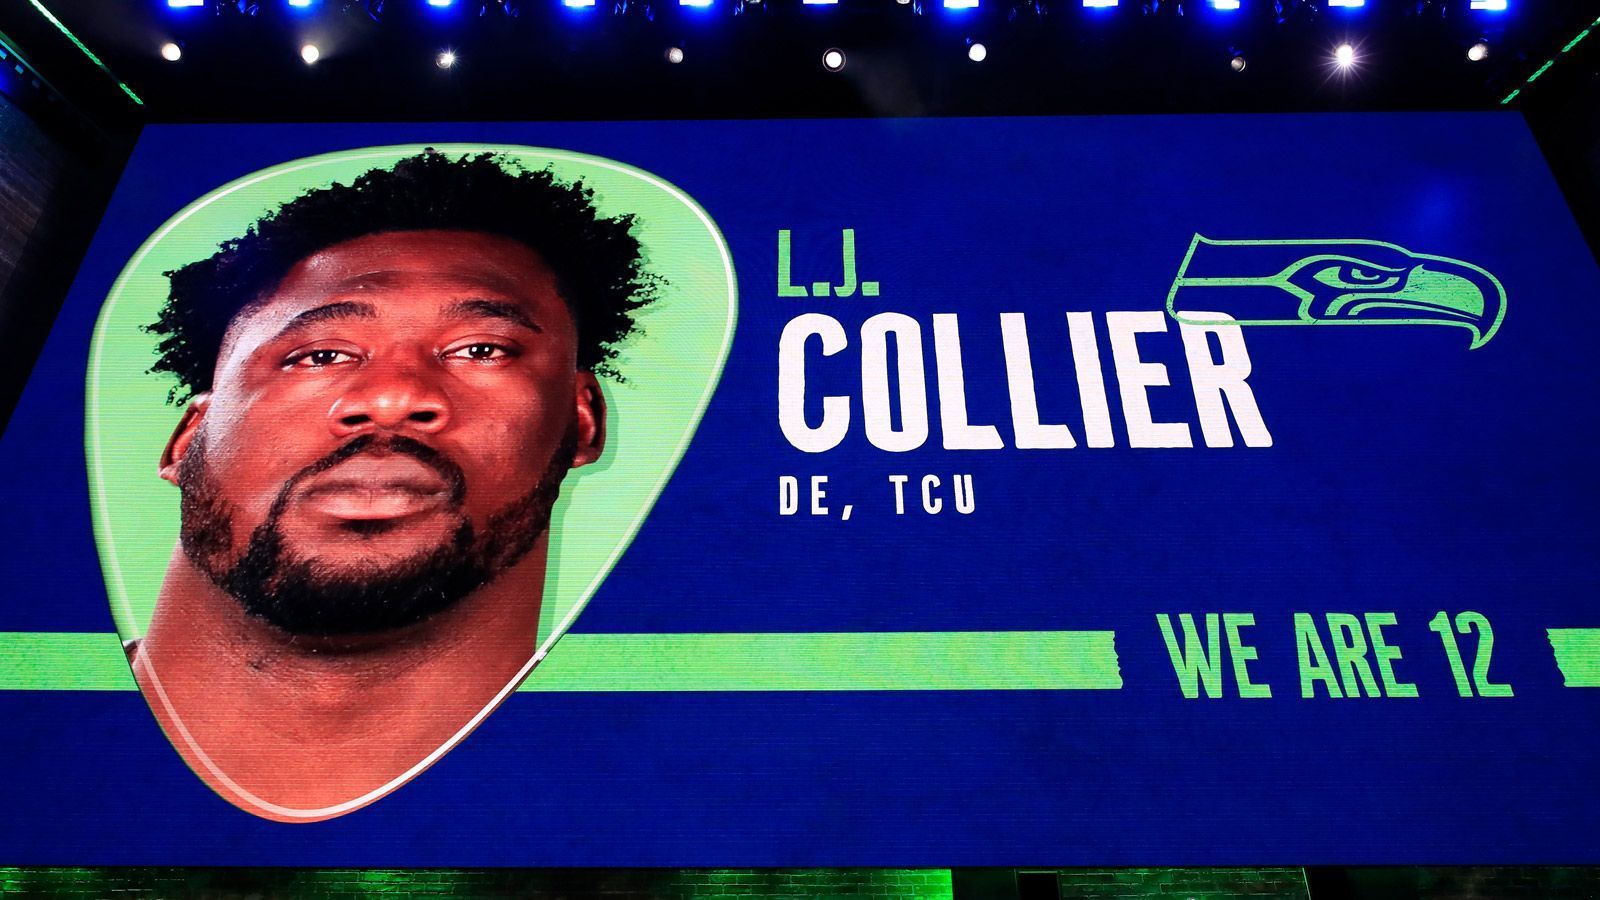 
                <strong>Draft Pick 29: Seattle Seahawks (durch Trade mit Kansas City Chiefs)</strong><br>
                Spieler: L.J. Collier Position: Defensive EndCollege:  TCU
              